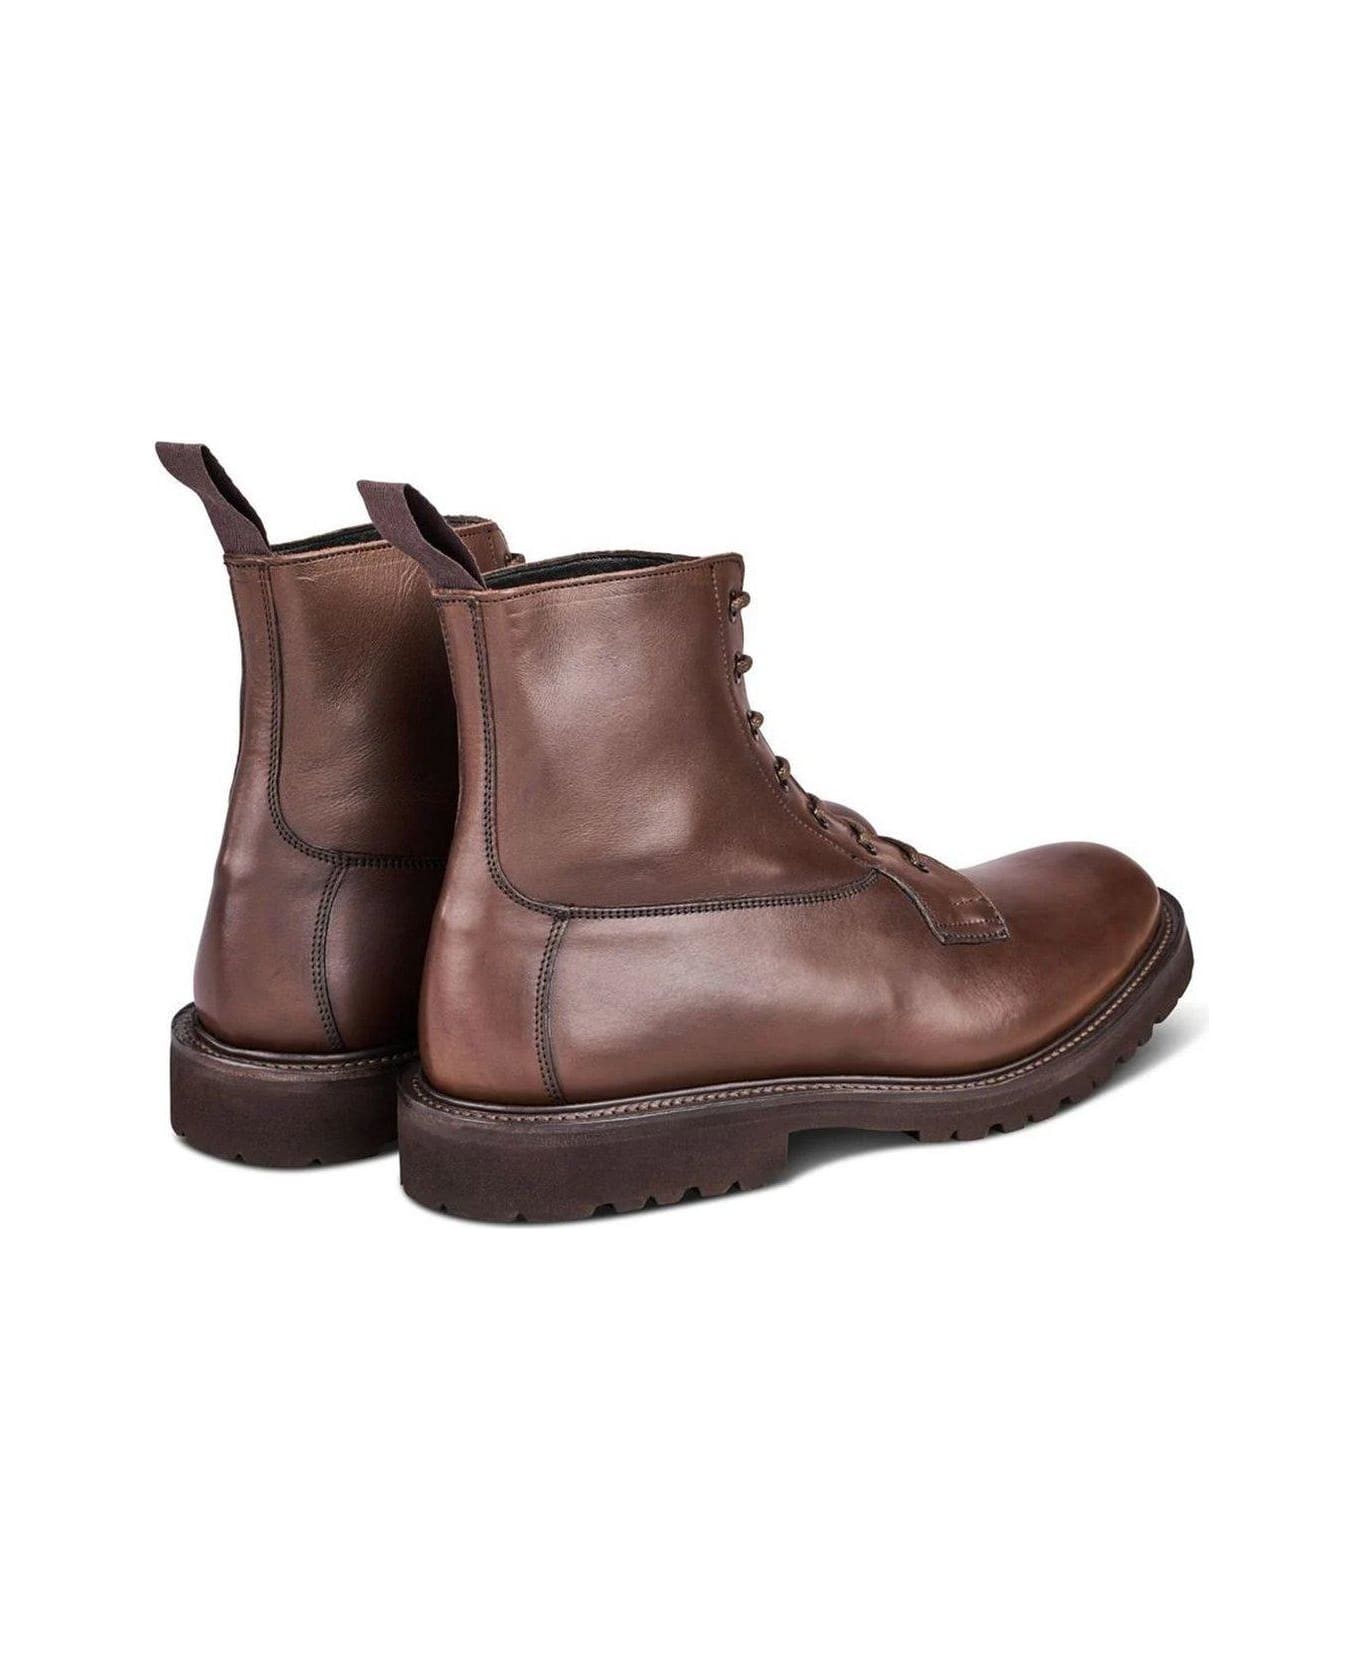 Tricker's Lace-up Boots Boots - ESPRESSO